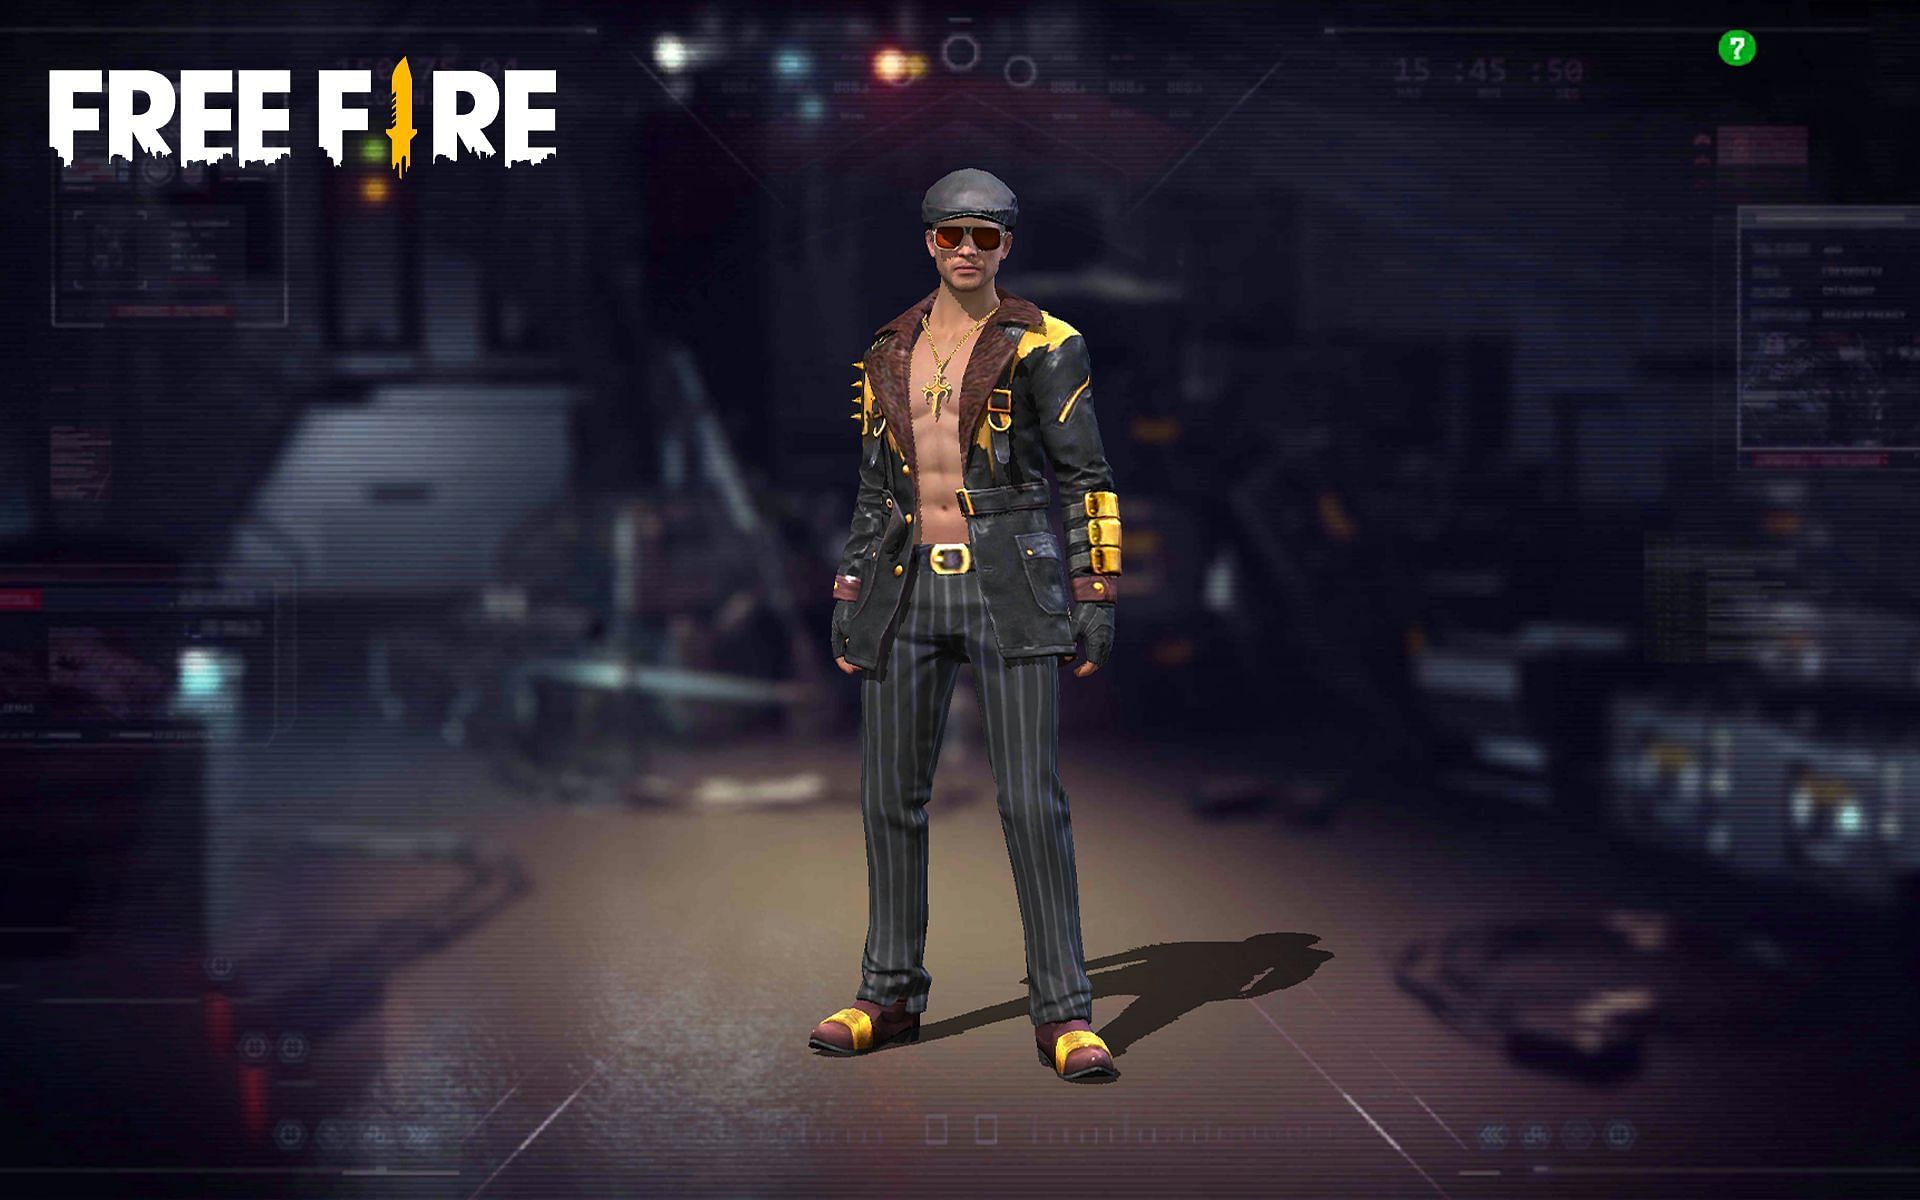 Active Free Fire redeem code to get Mob Boss Loot Crate and surfboard today (15 December 2021)